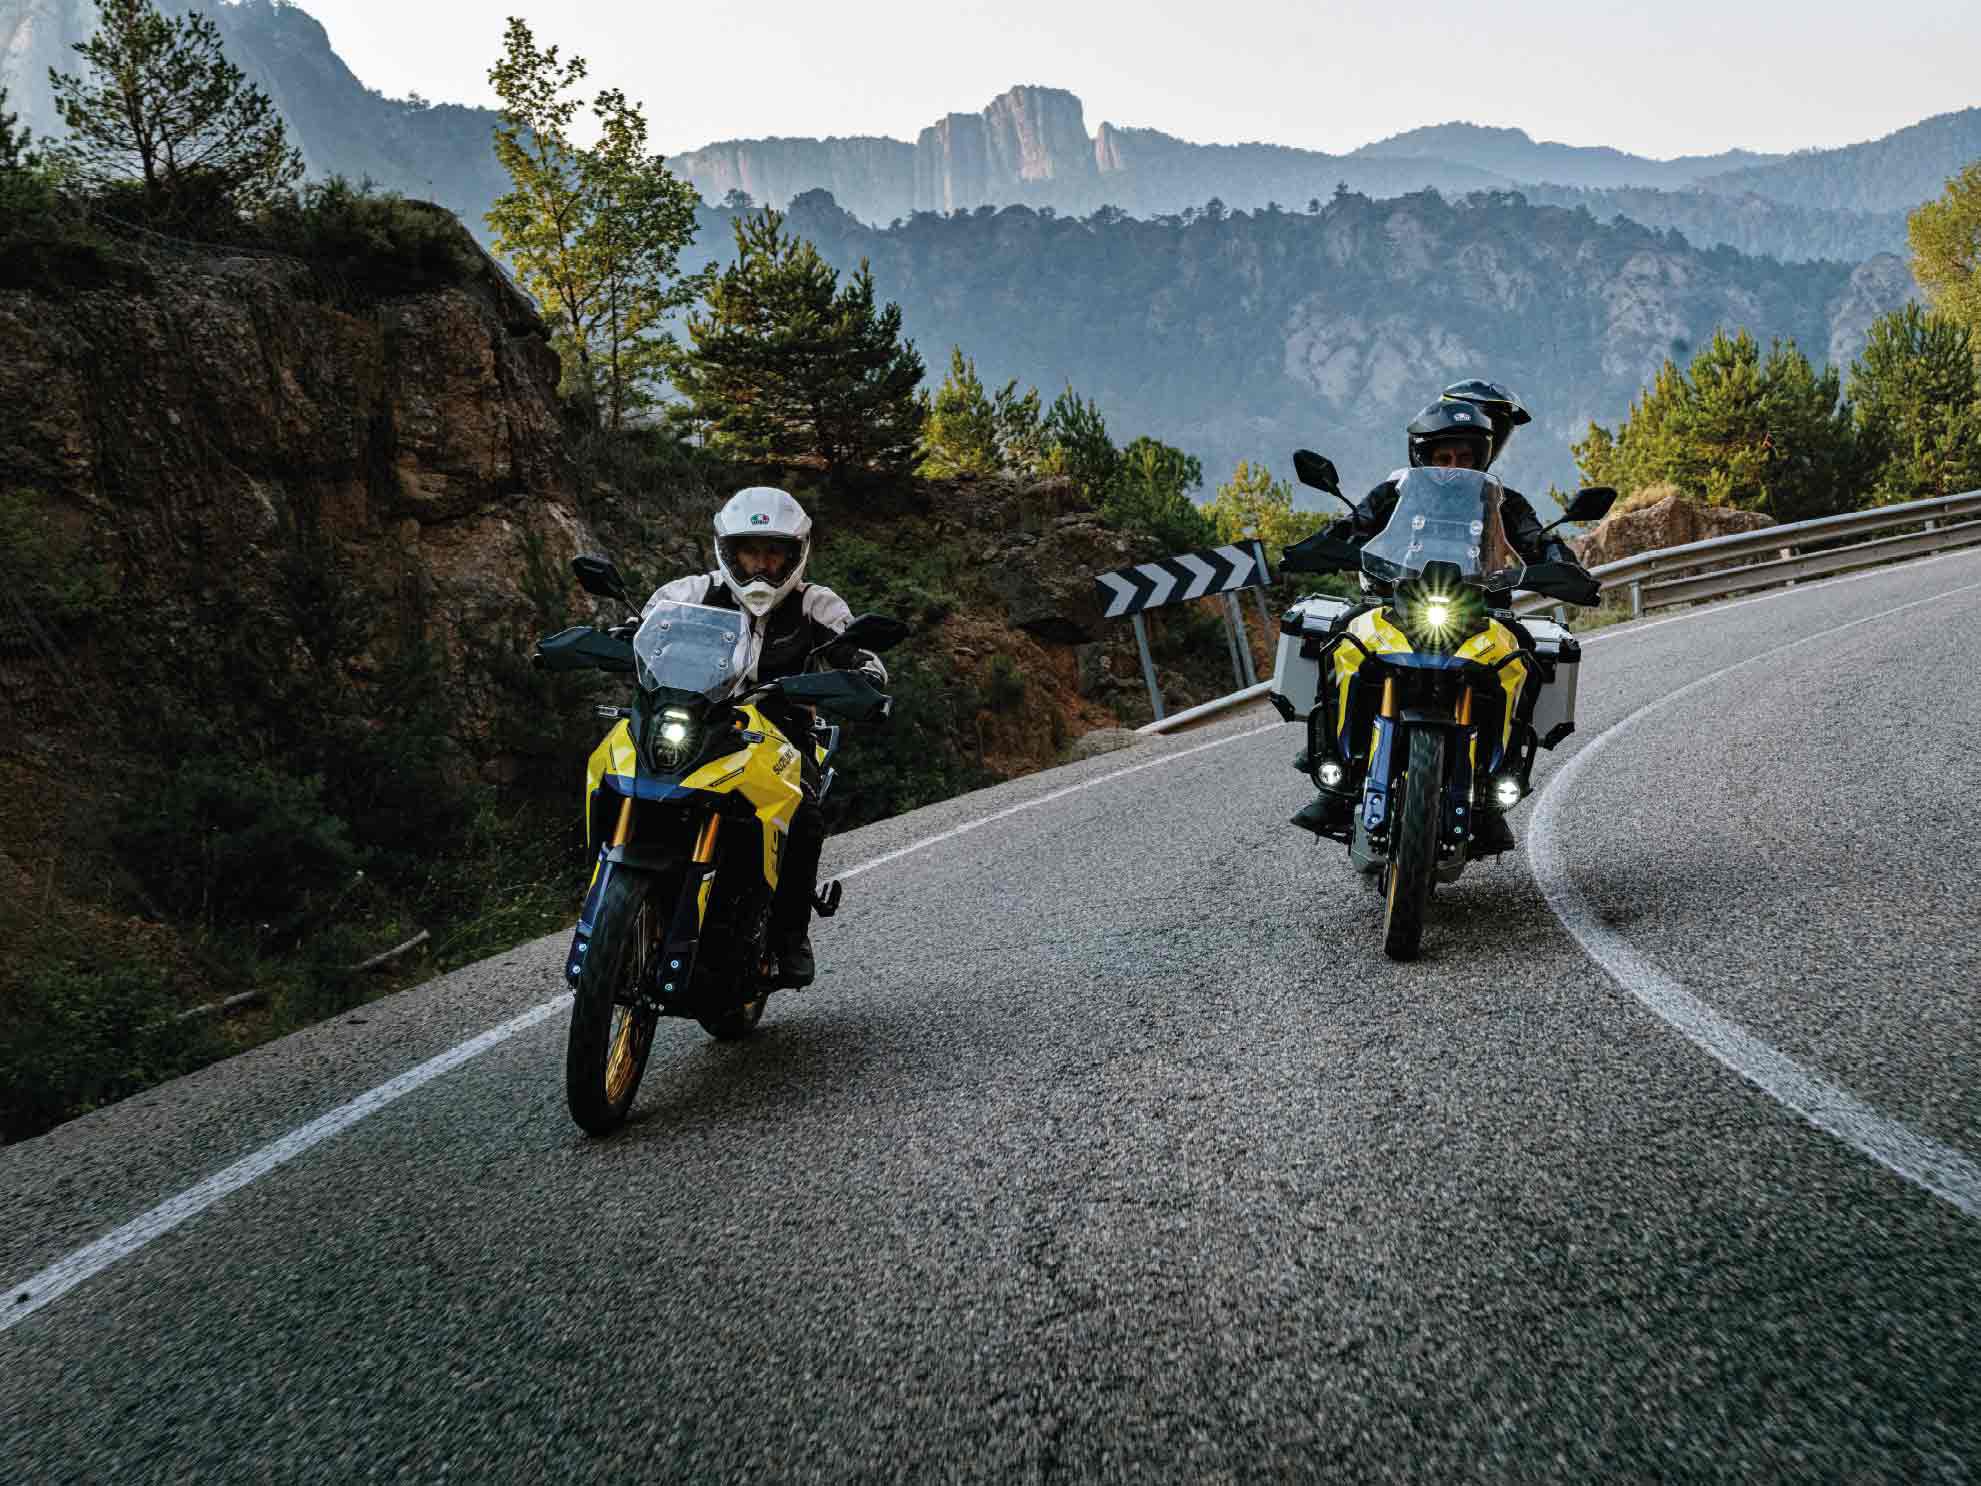 Suzuki has a long list of accessories available for the new V-Stroms, allowing riders to customize it to suit any adventure.